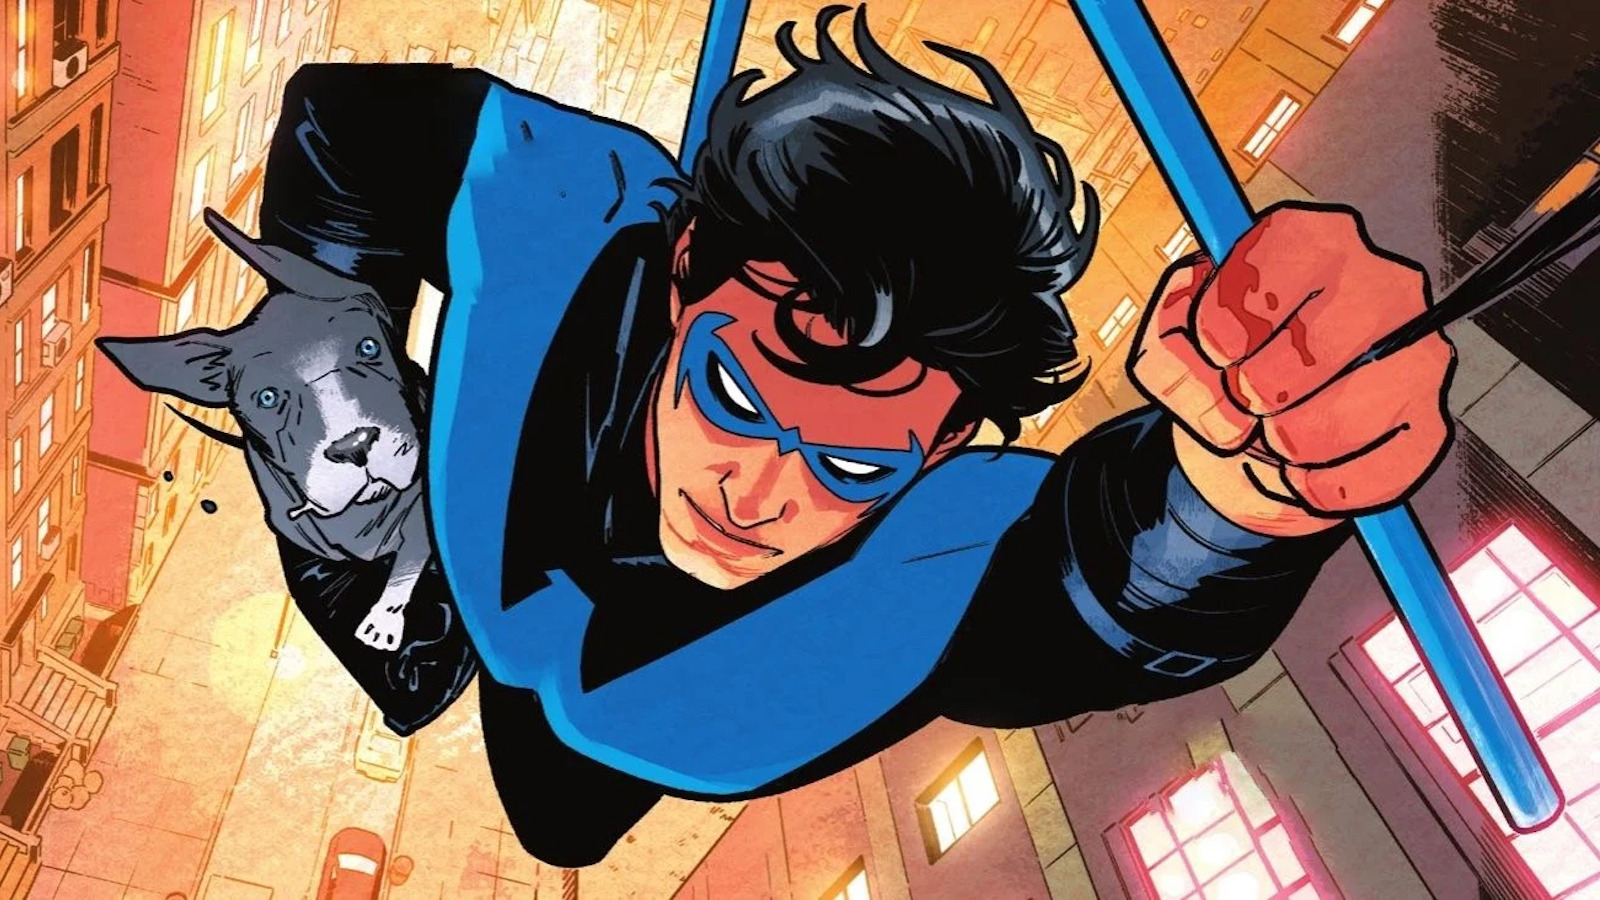 Did You Catch The Nightwing Easter Egg In The Batman?